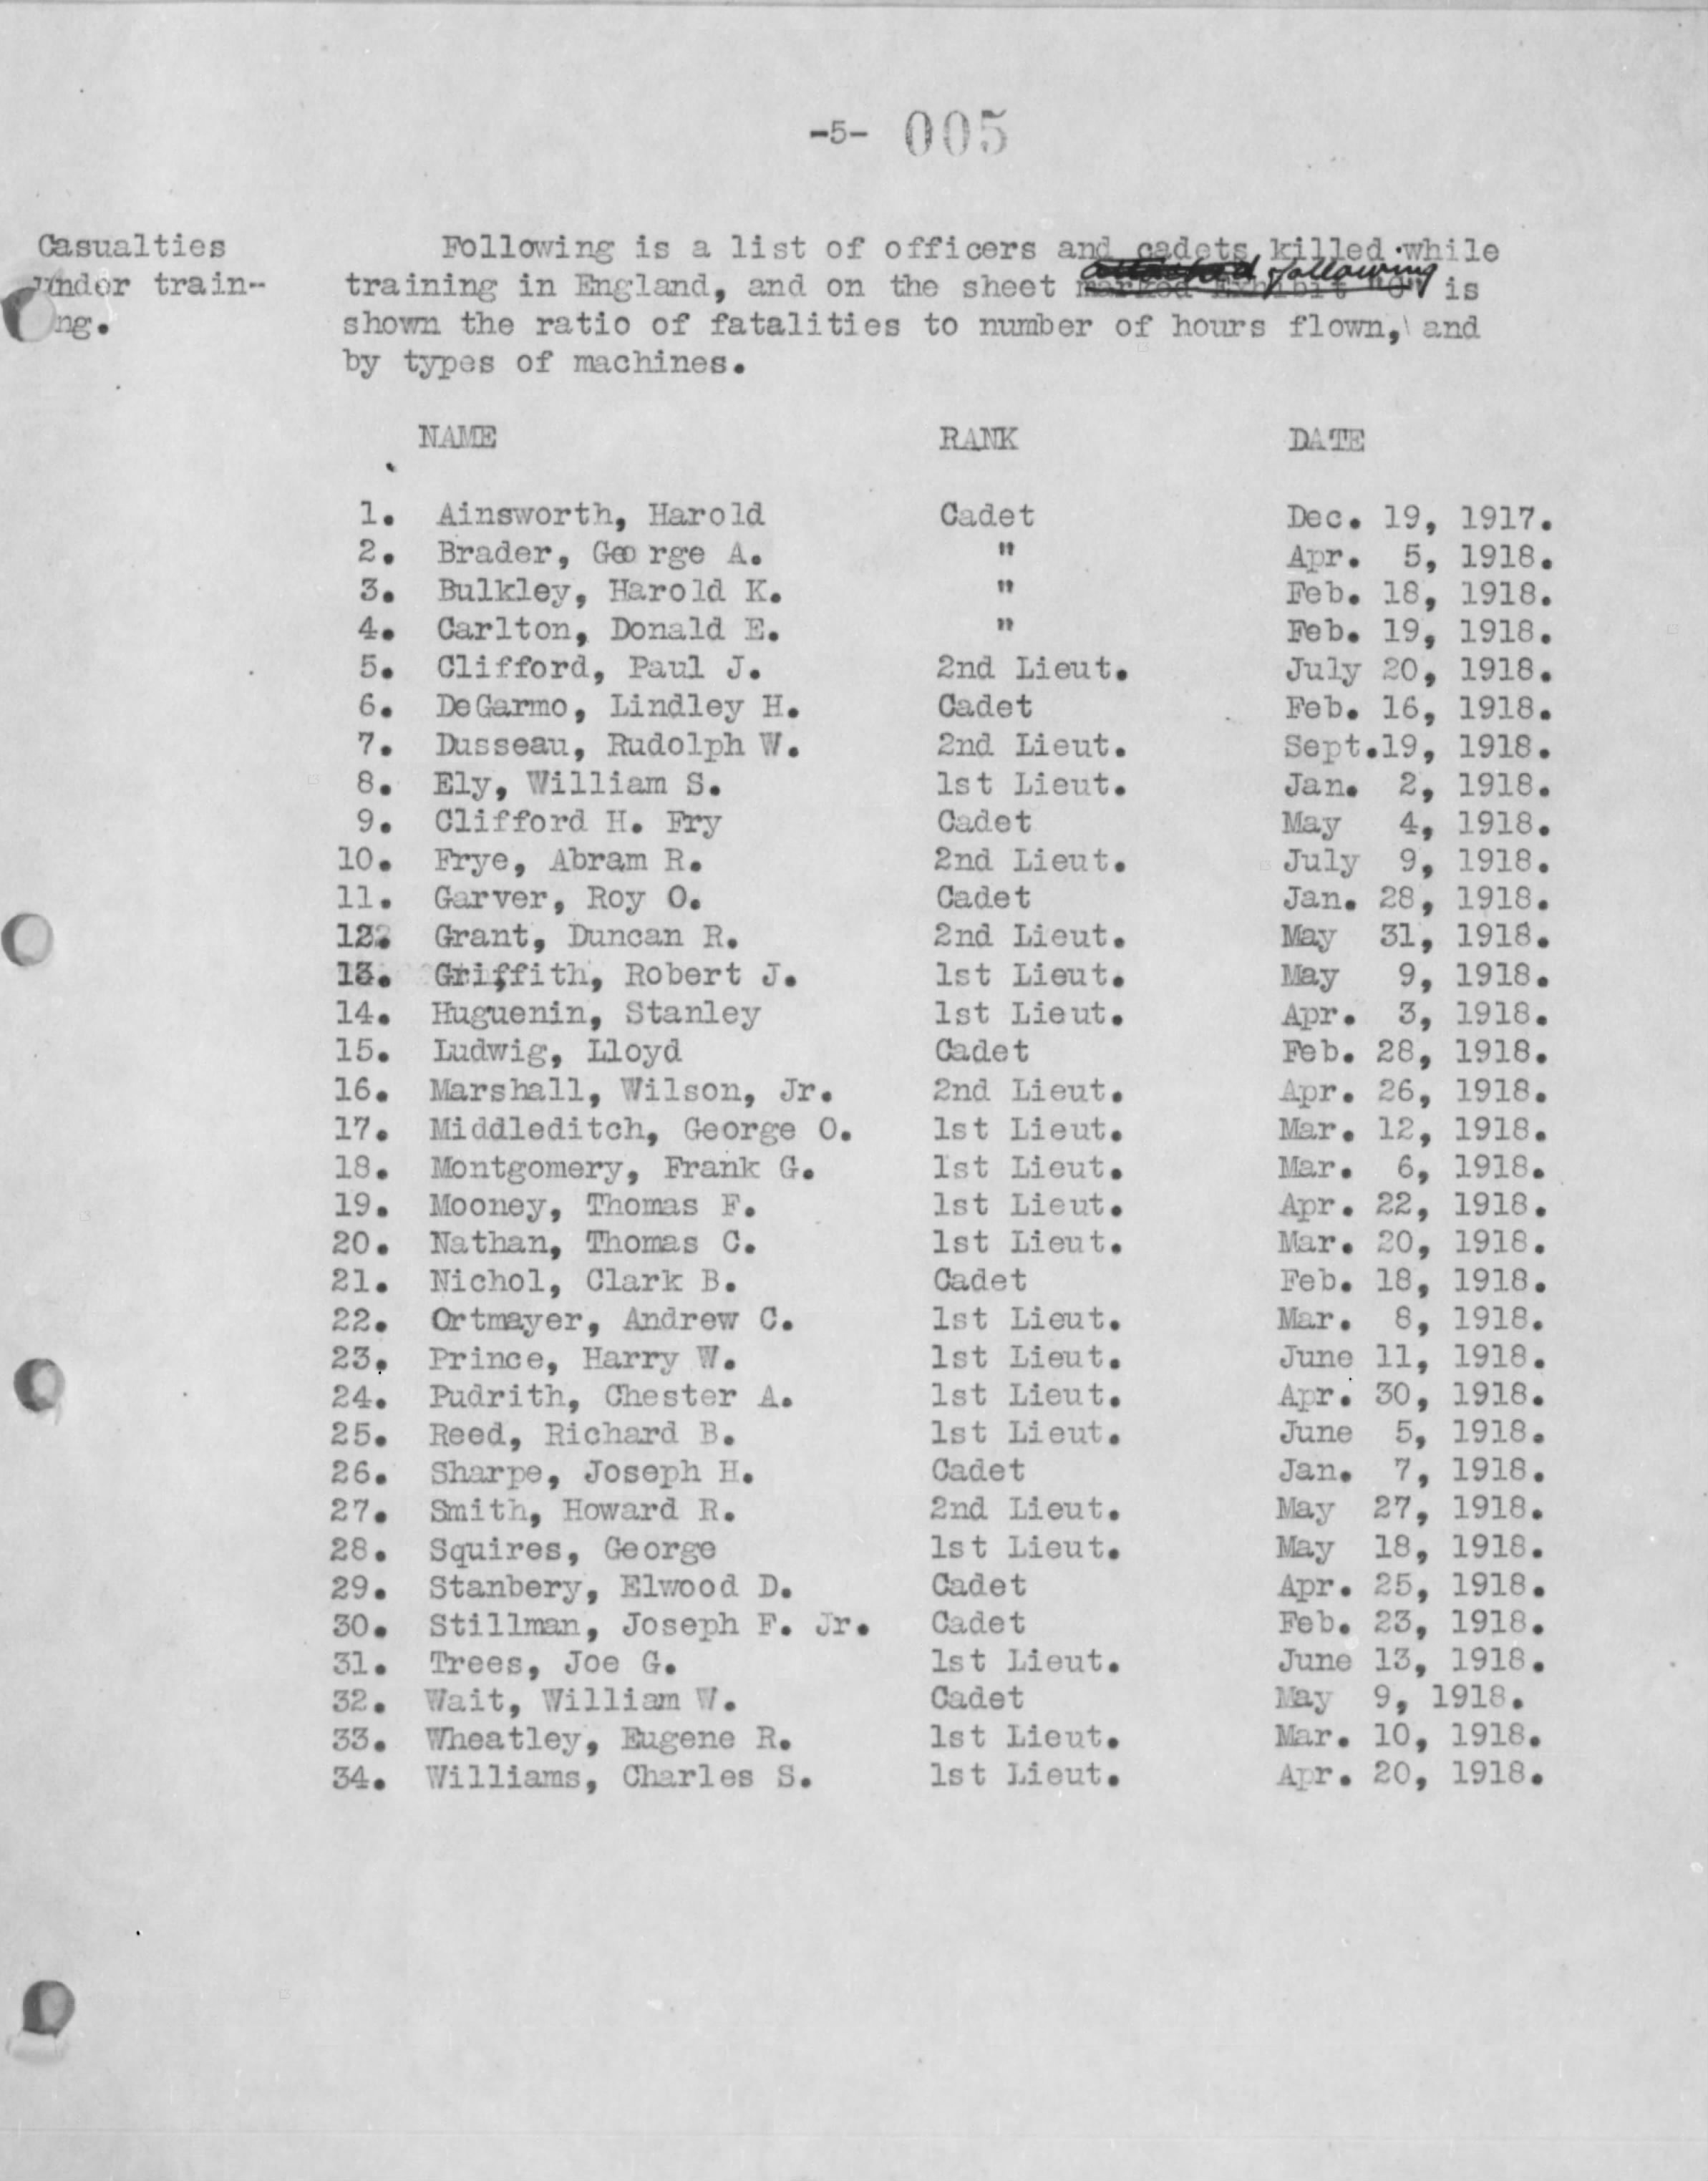 List labelled "casualties under training" with thirty-four names with military rank and dates of each casualty.